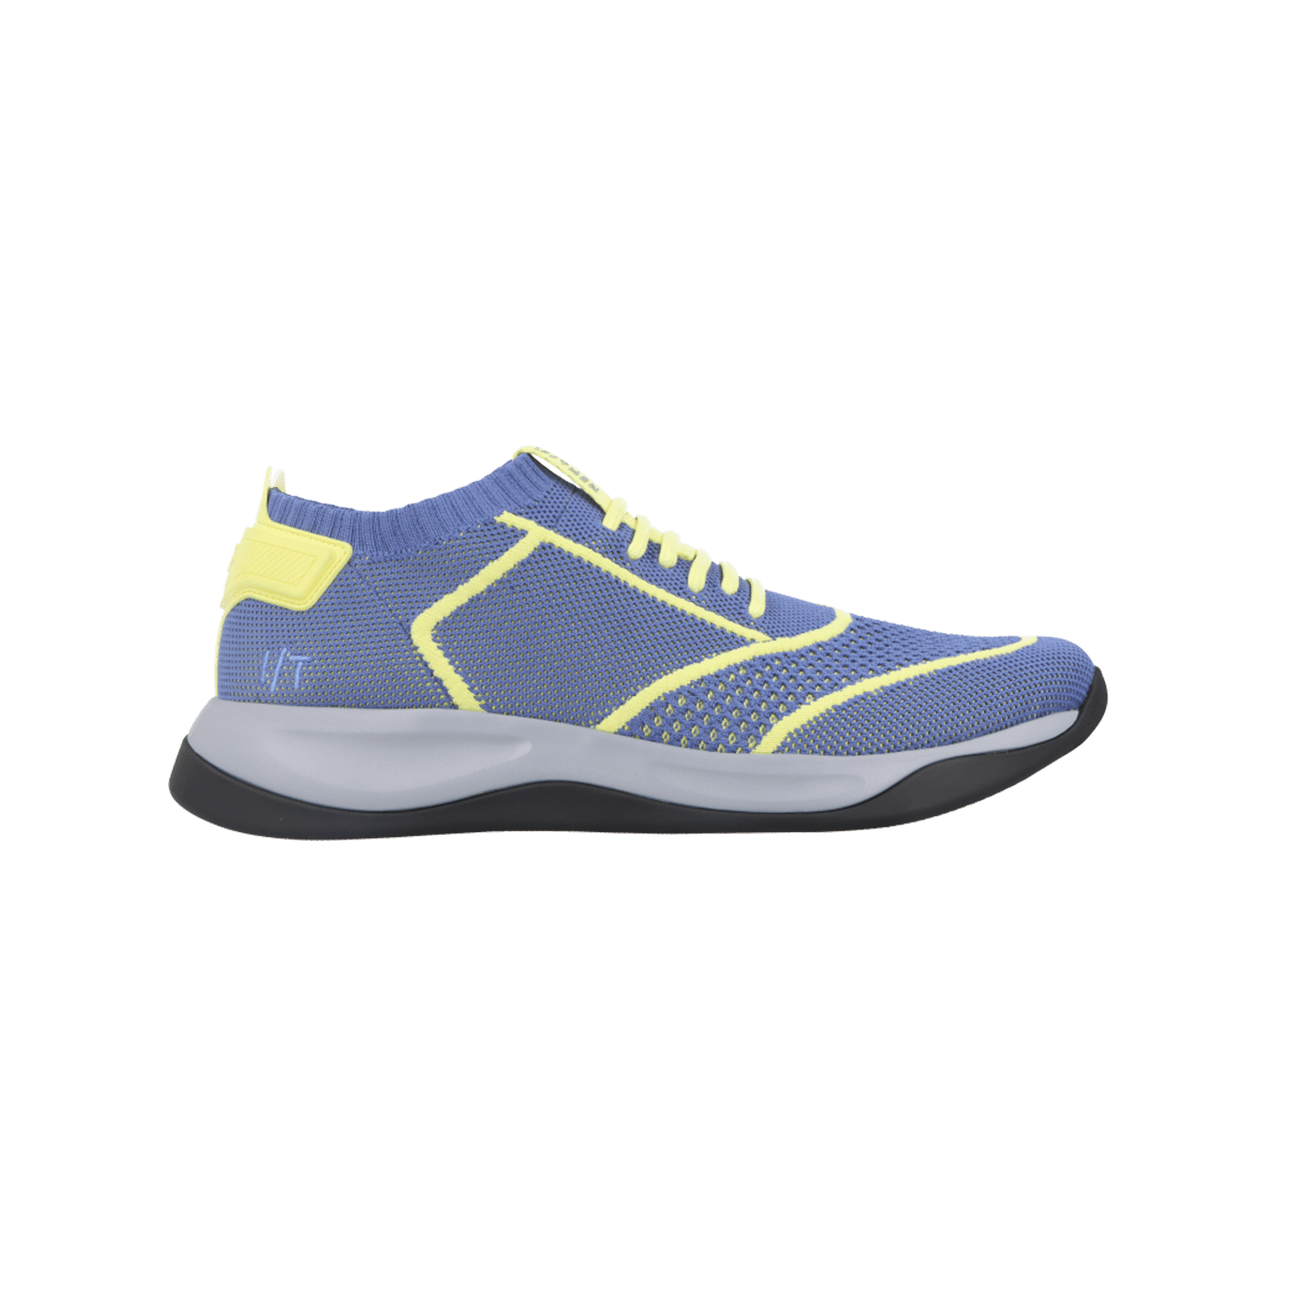 IF/THEN the Callisto men sneaker in Azure Horizon blue and yellow side